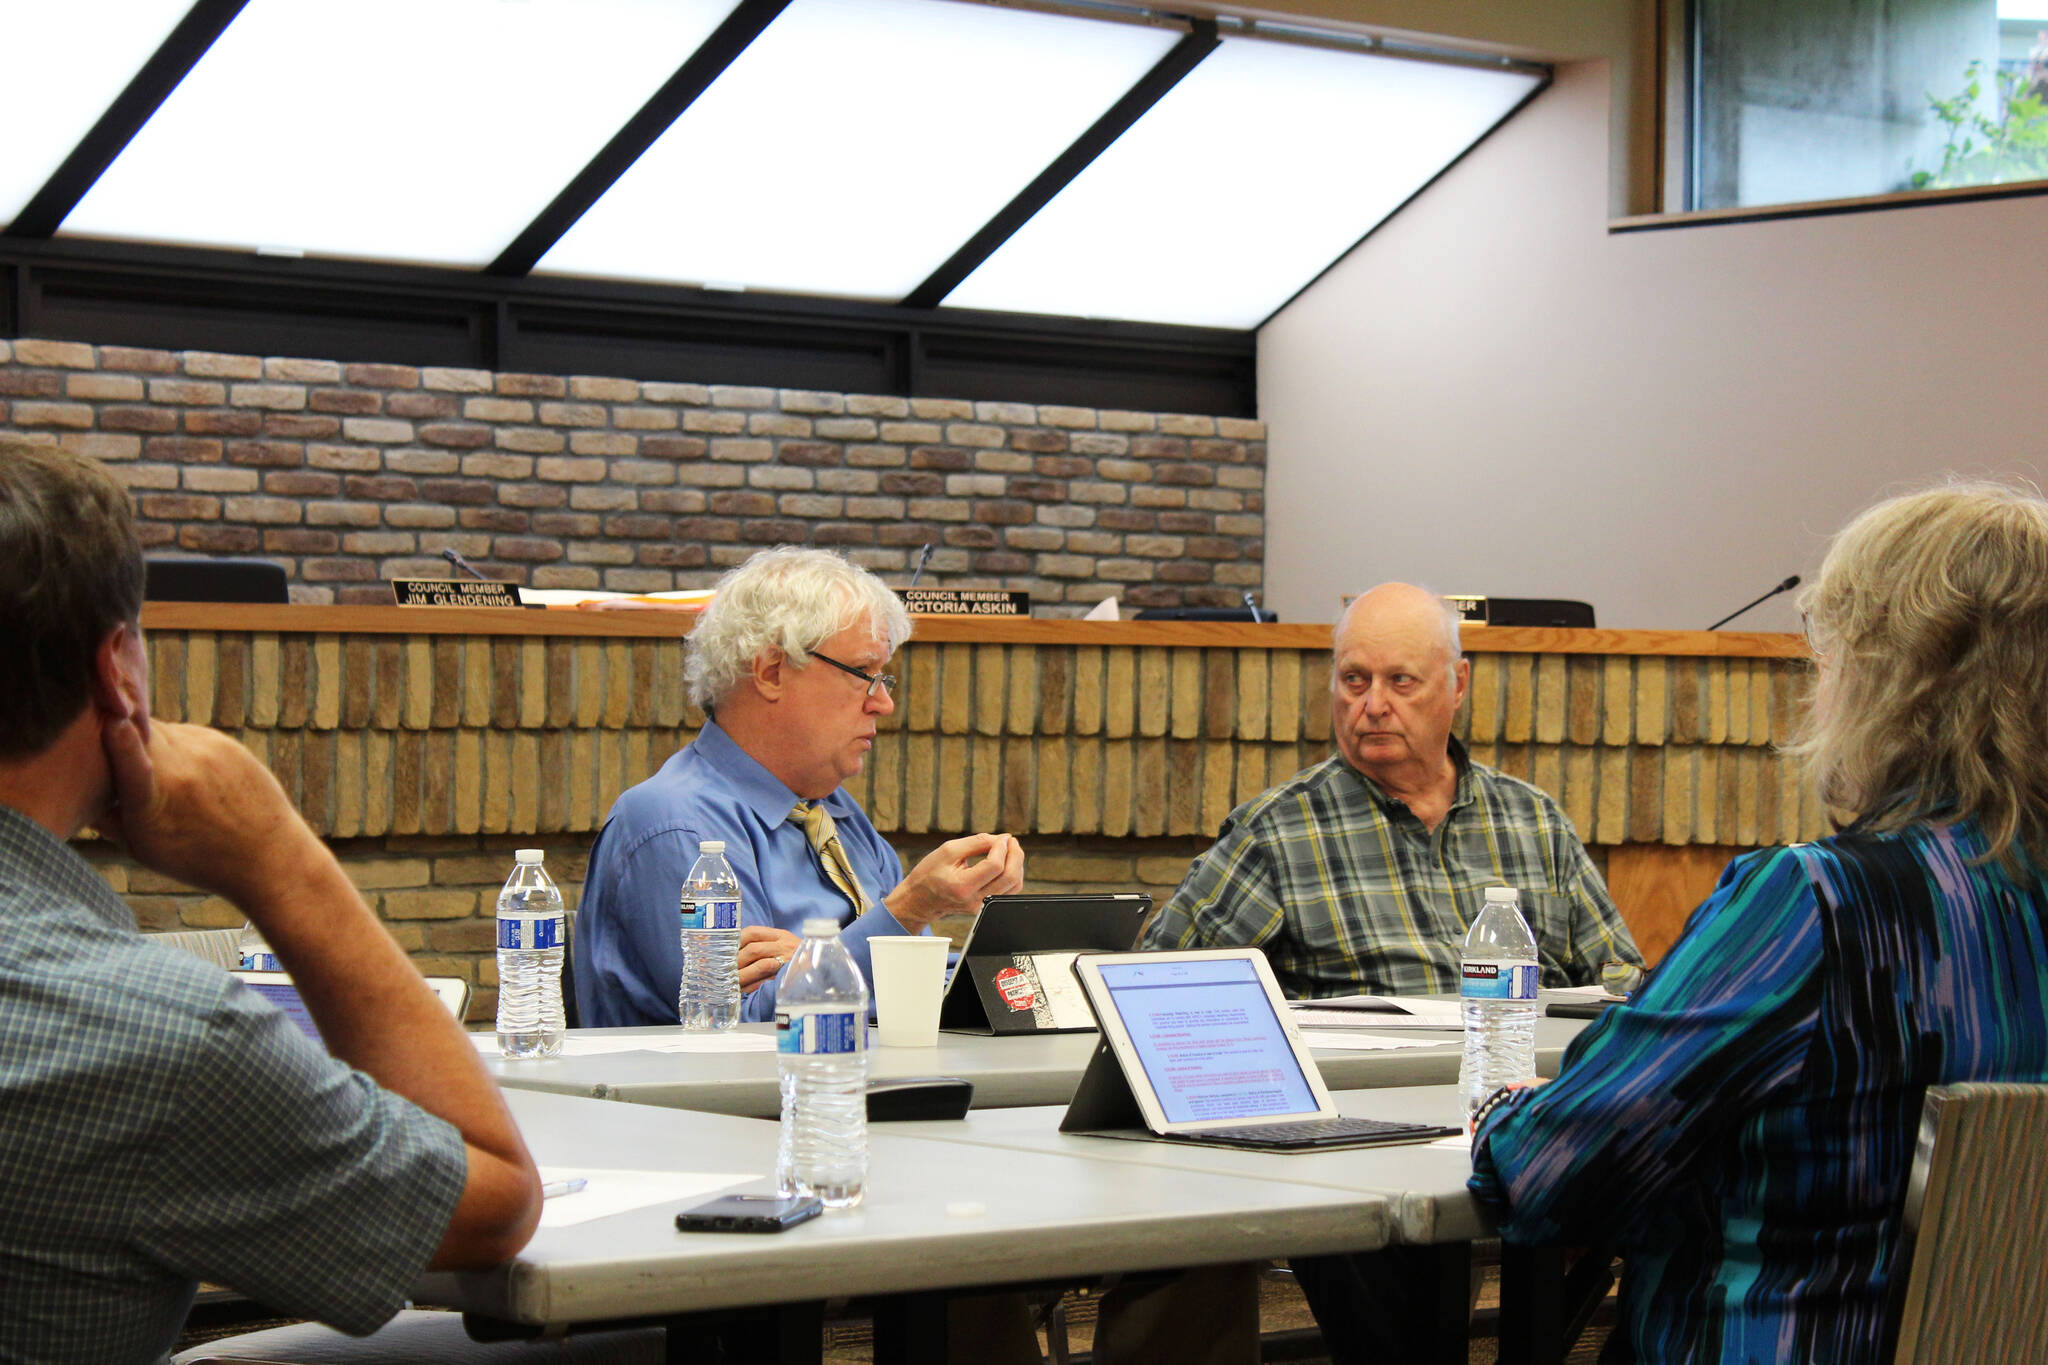 Kenai Vice Mayor and Kenai City Council member Bob Molloy (center), council member Jim Glendening (right), council member Victoria Askin (far right), and council member Henry Knackstedt (far left) participate in a work session discussing the overhaul of Kenai election codes on Wednesday at Kenai City Hall.